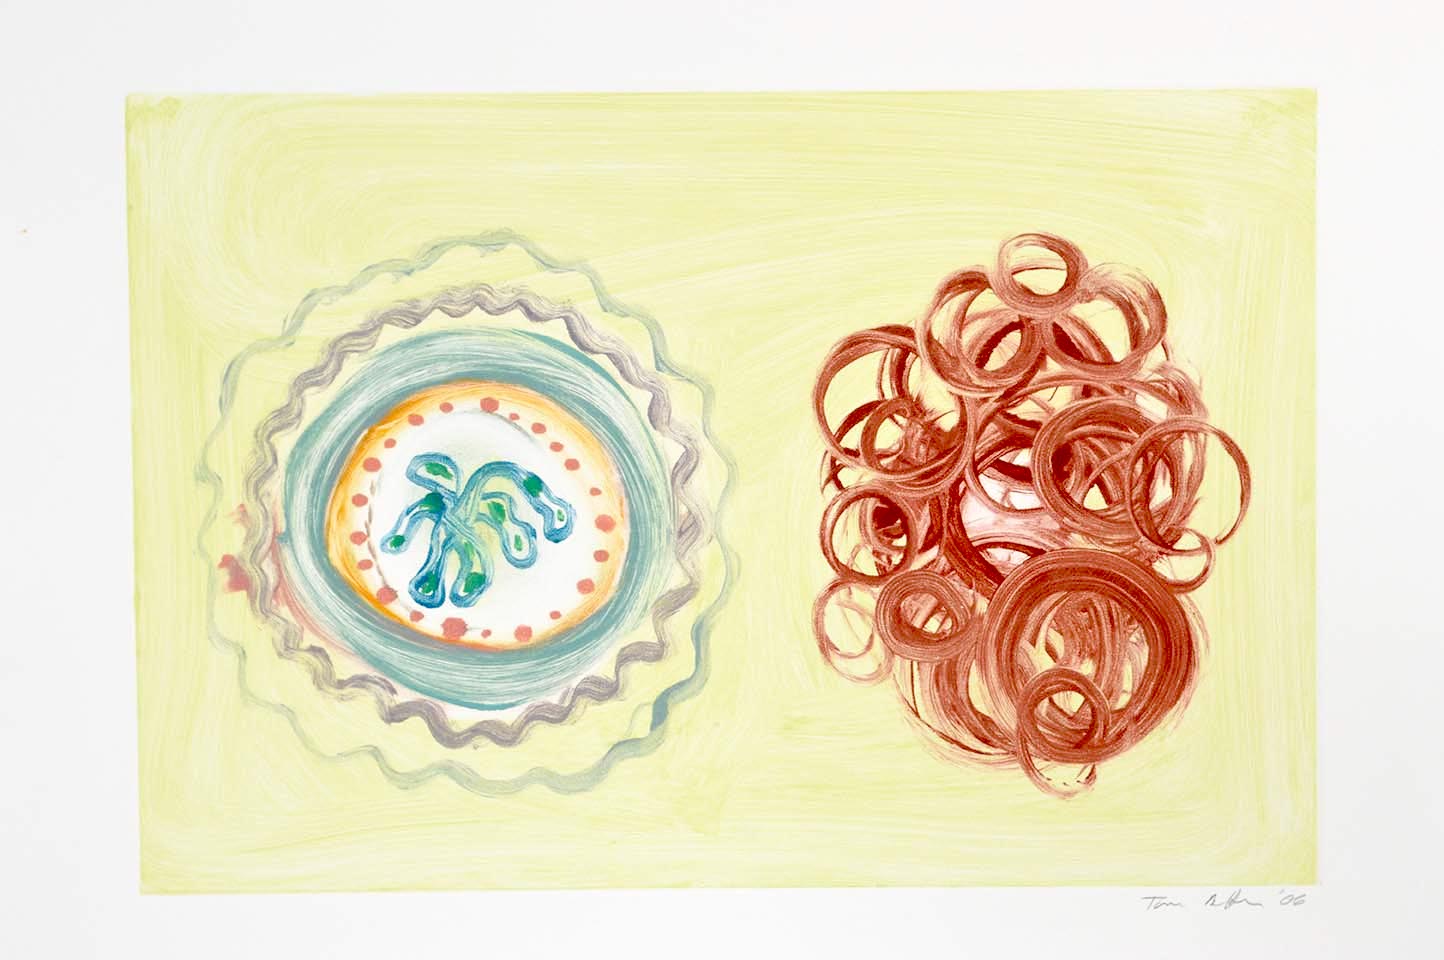  Oil on Arches acid free rag paper, 26 x 30 inches (66 x 76.2 cm), signed and dated 2006 